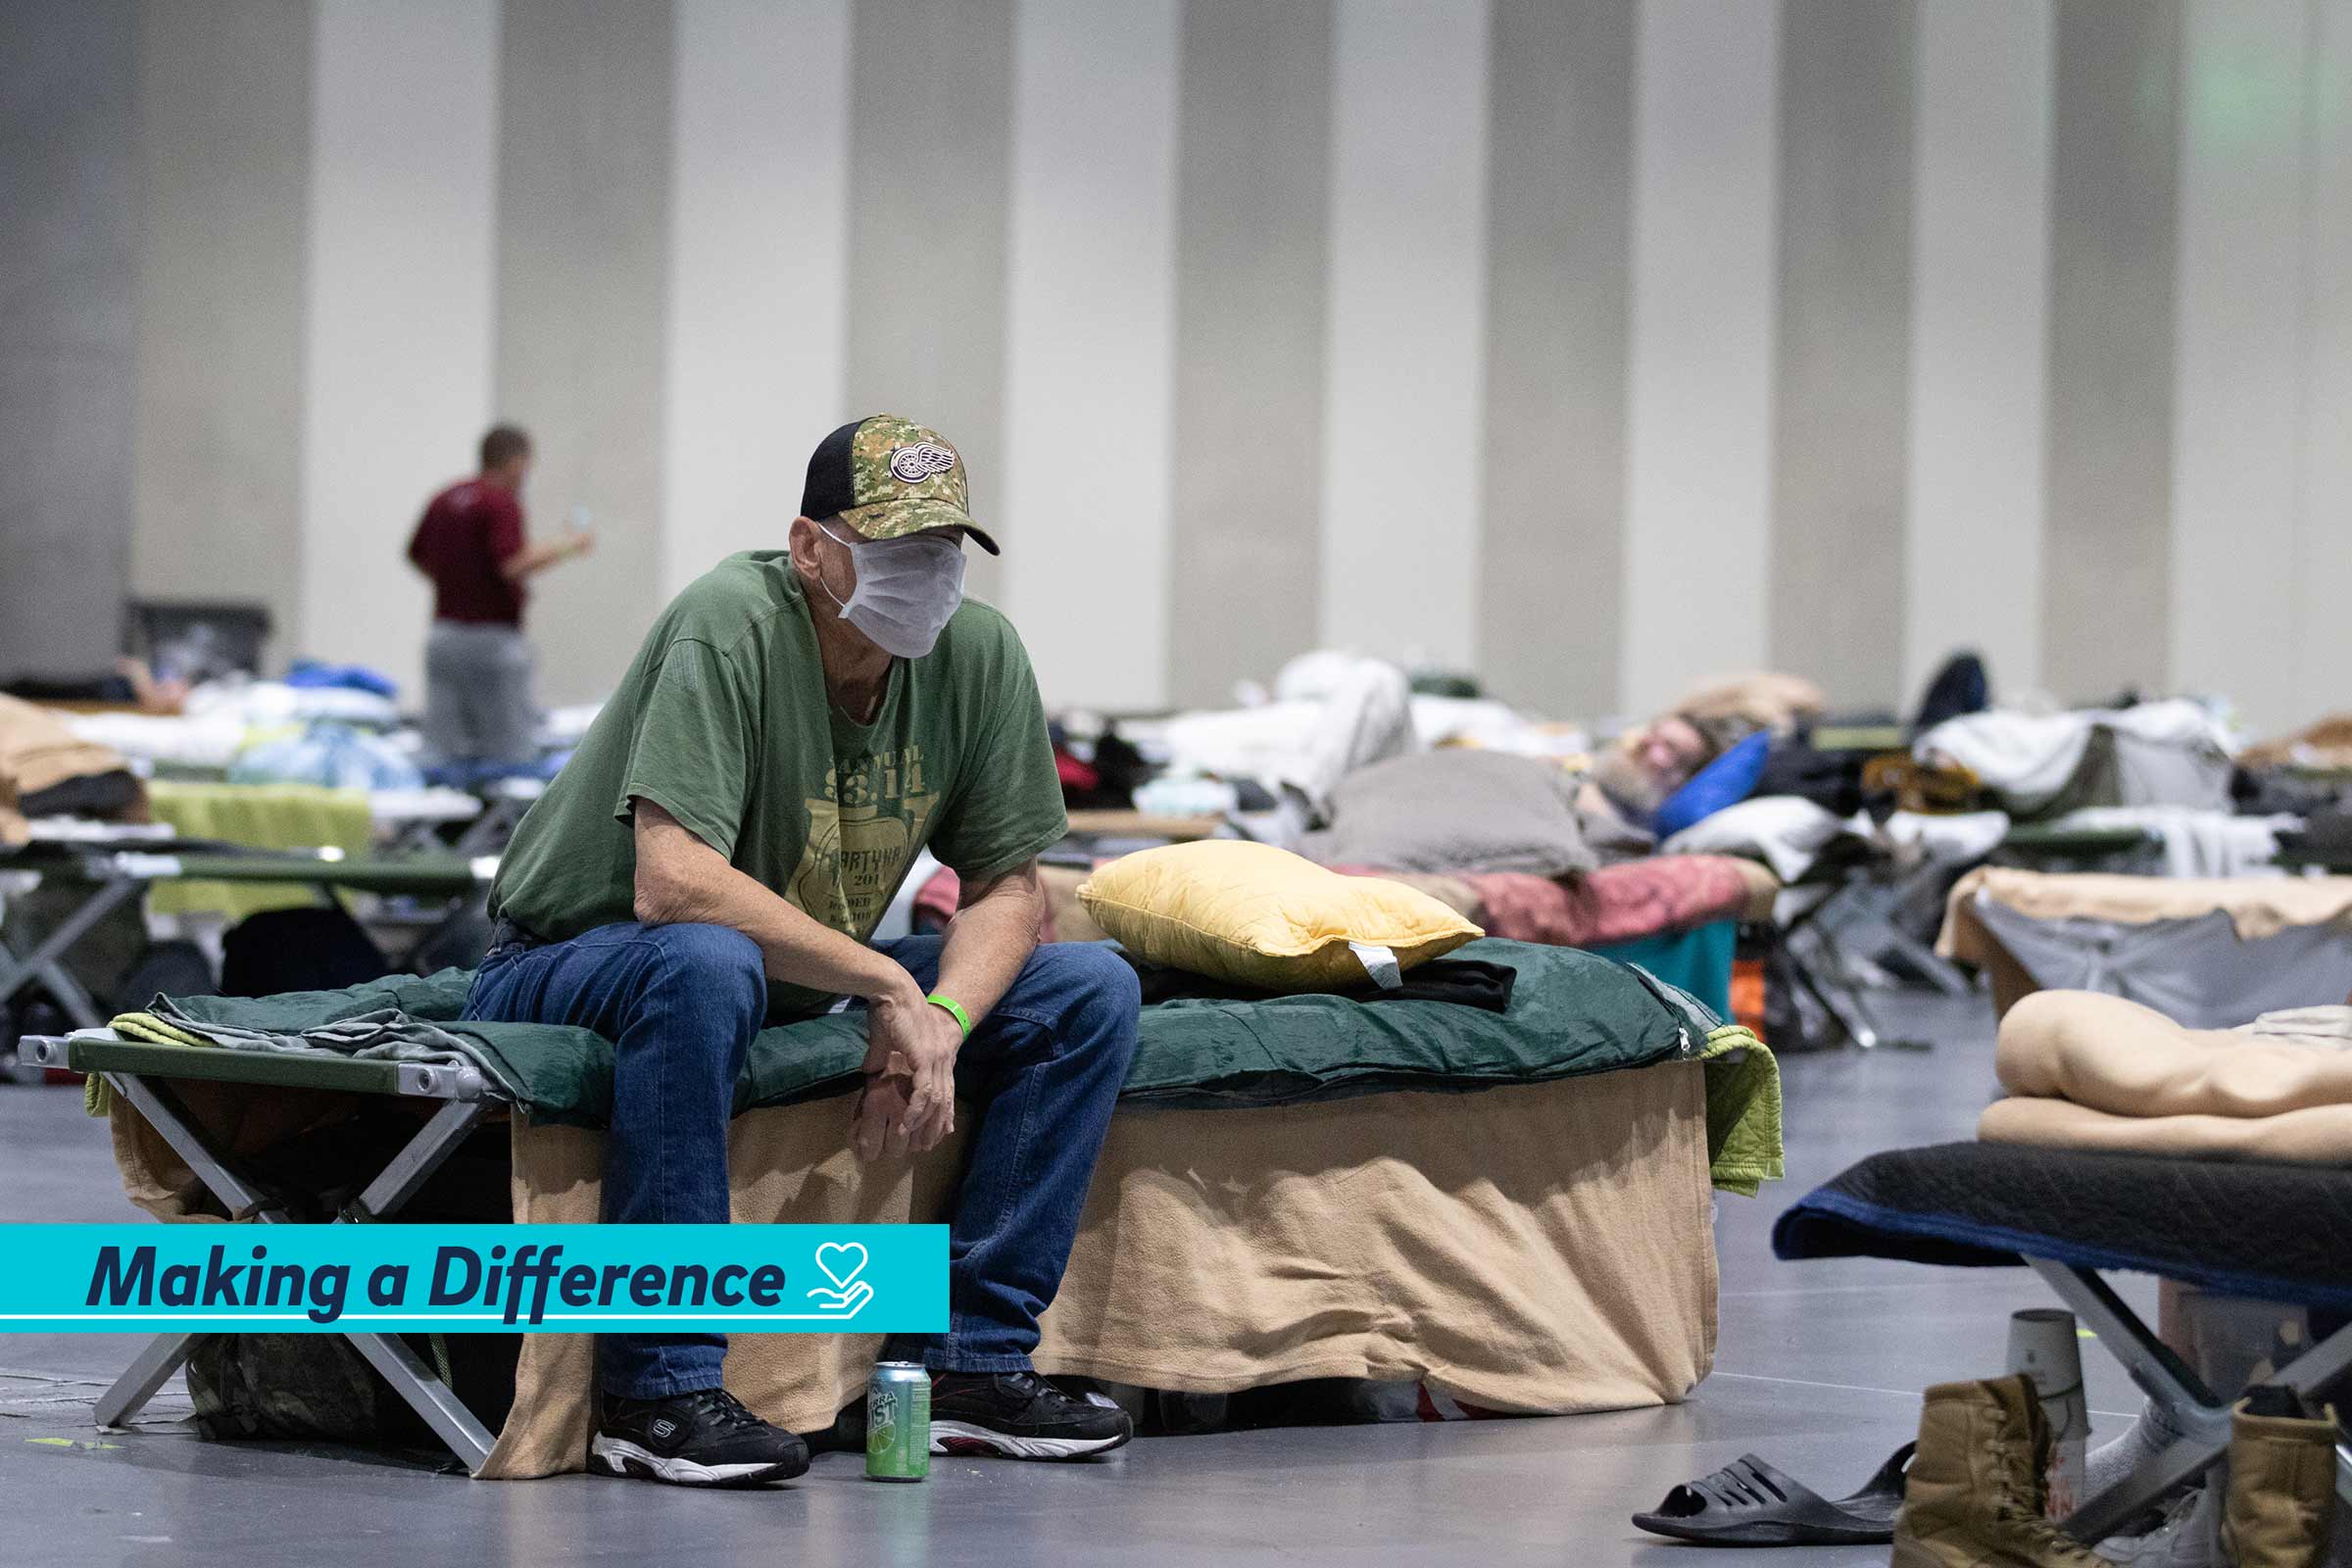 homeless residents being sheltered at the San Diego Convention Center during social distancing